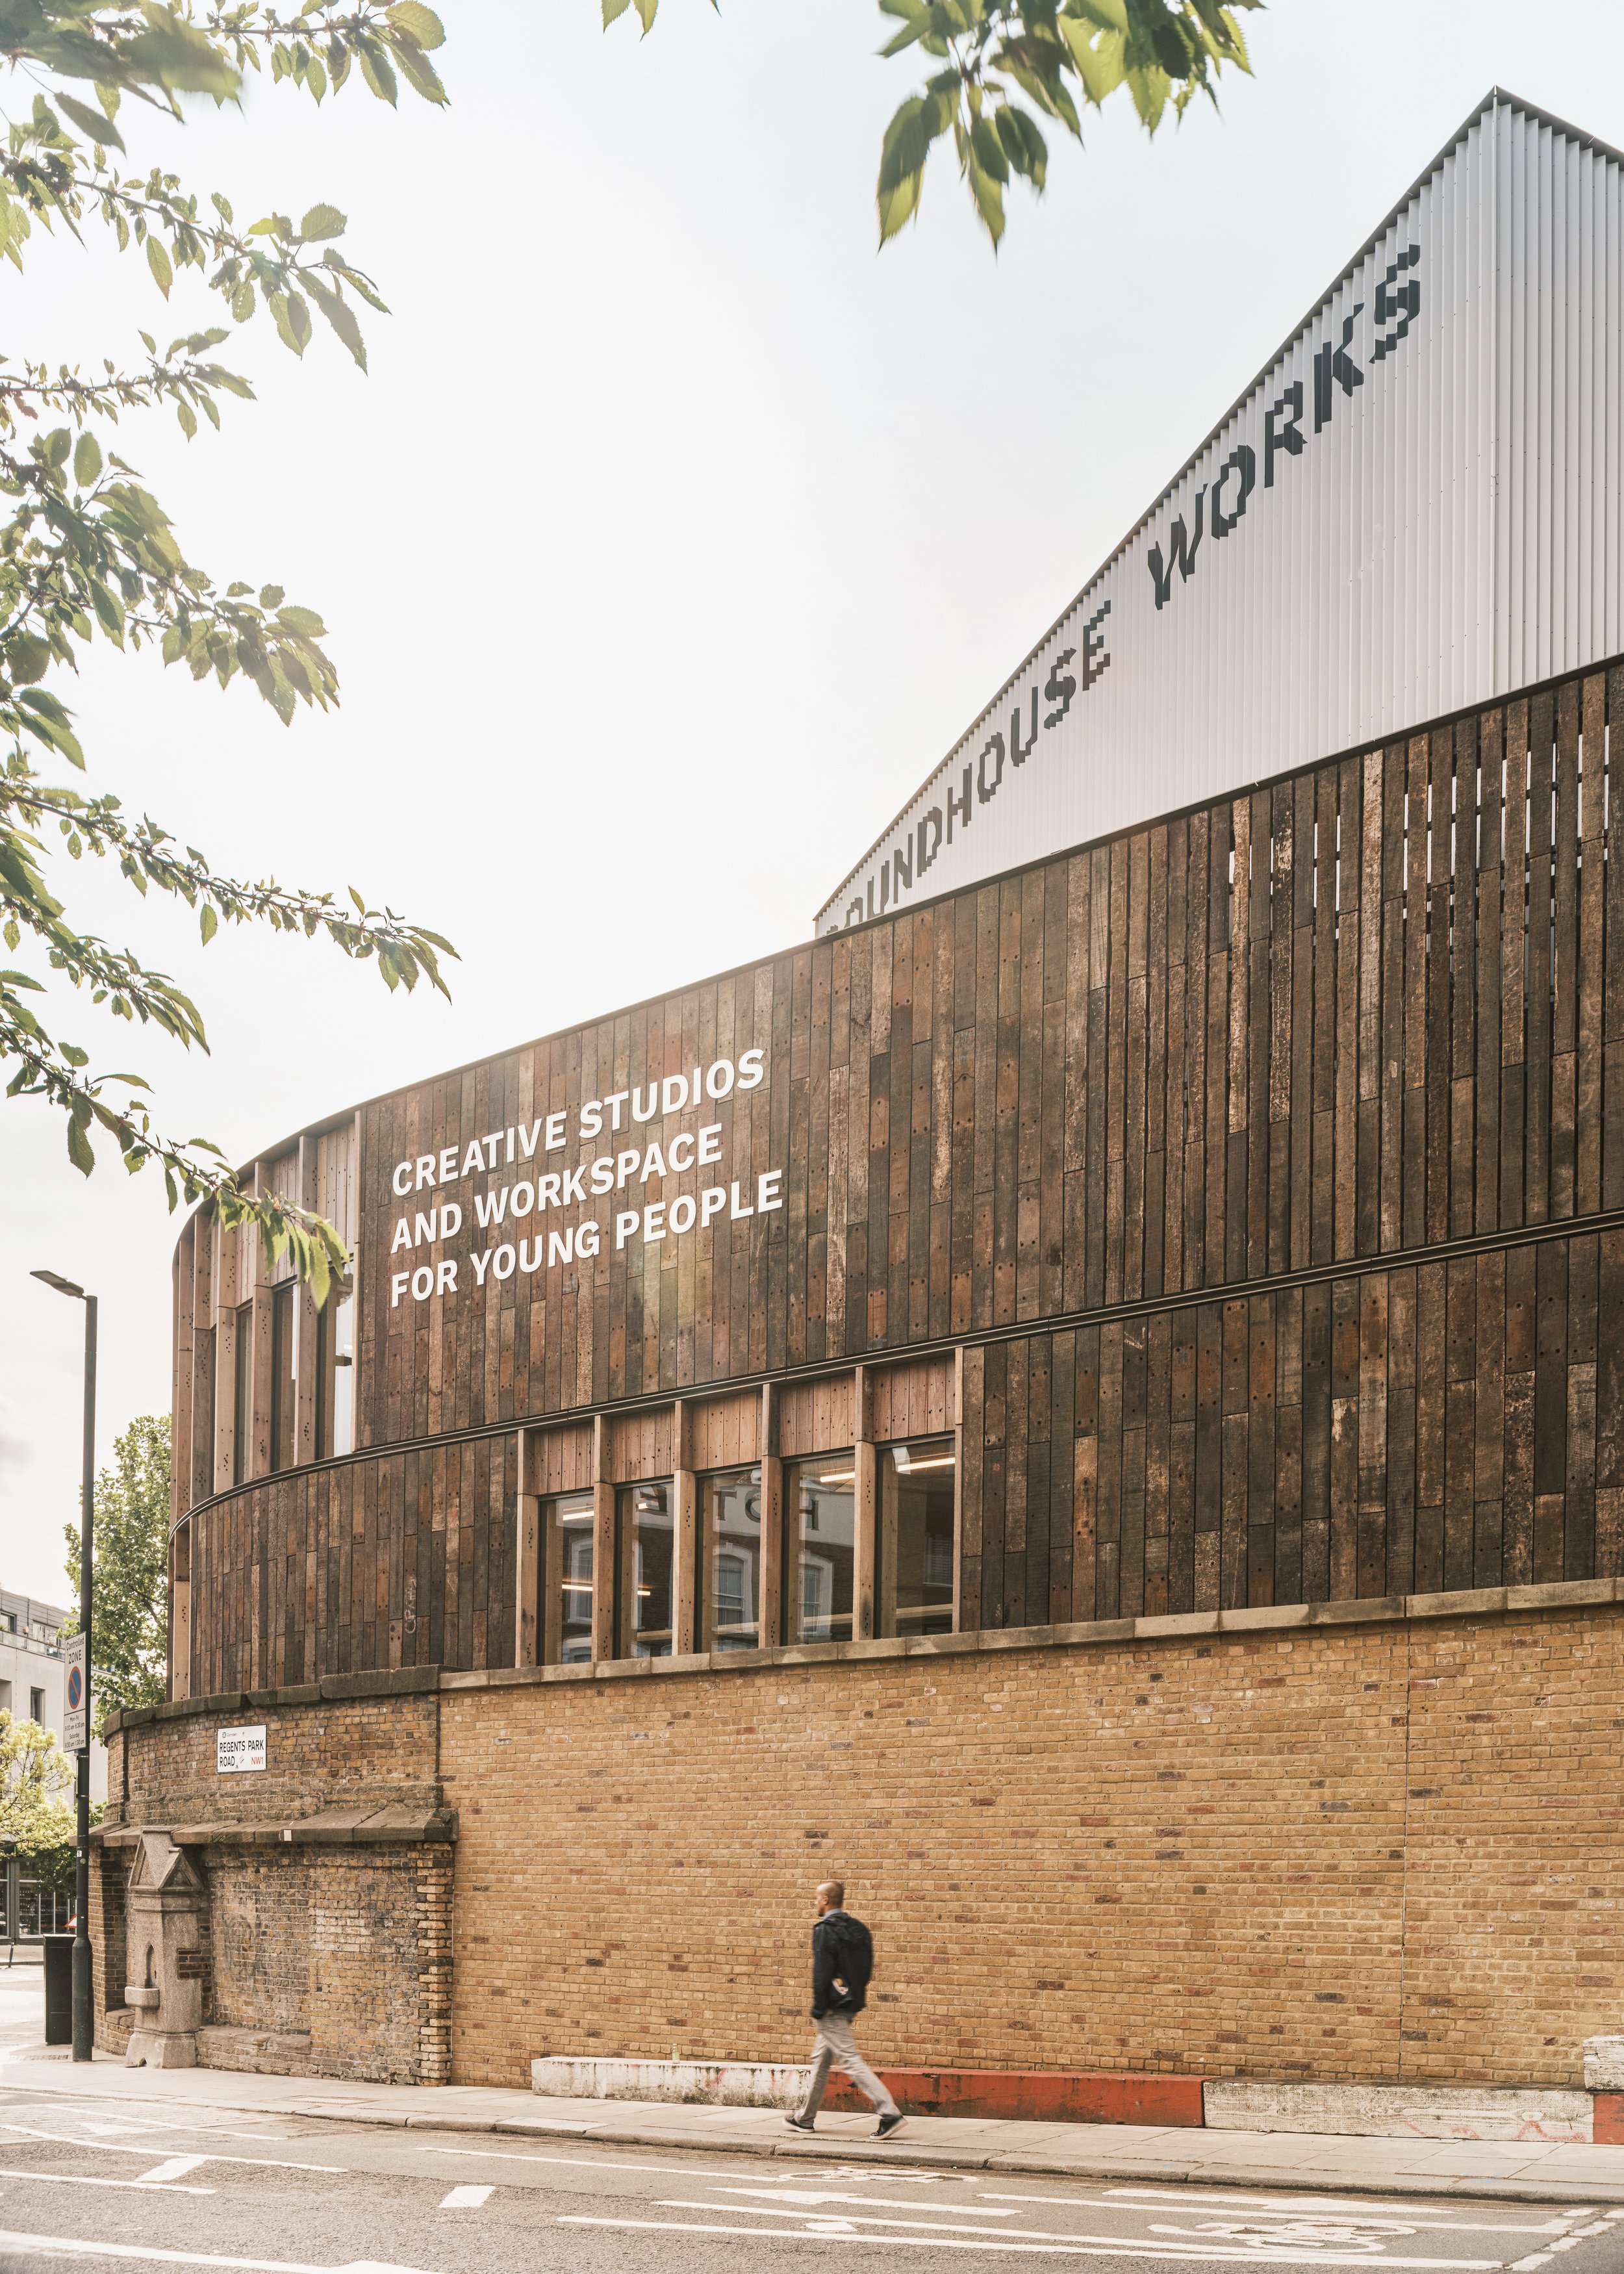 Fred+Howarth+Photography_Roundhouse+Works_04.jpg